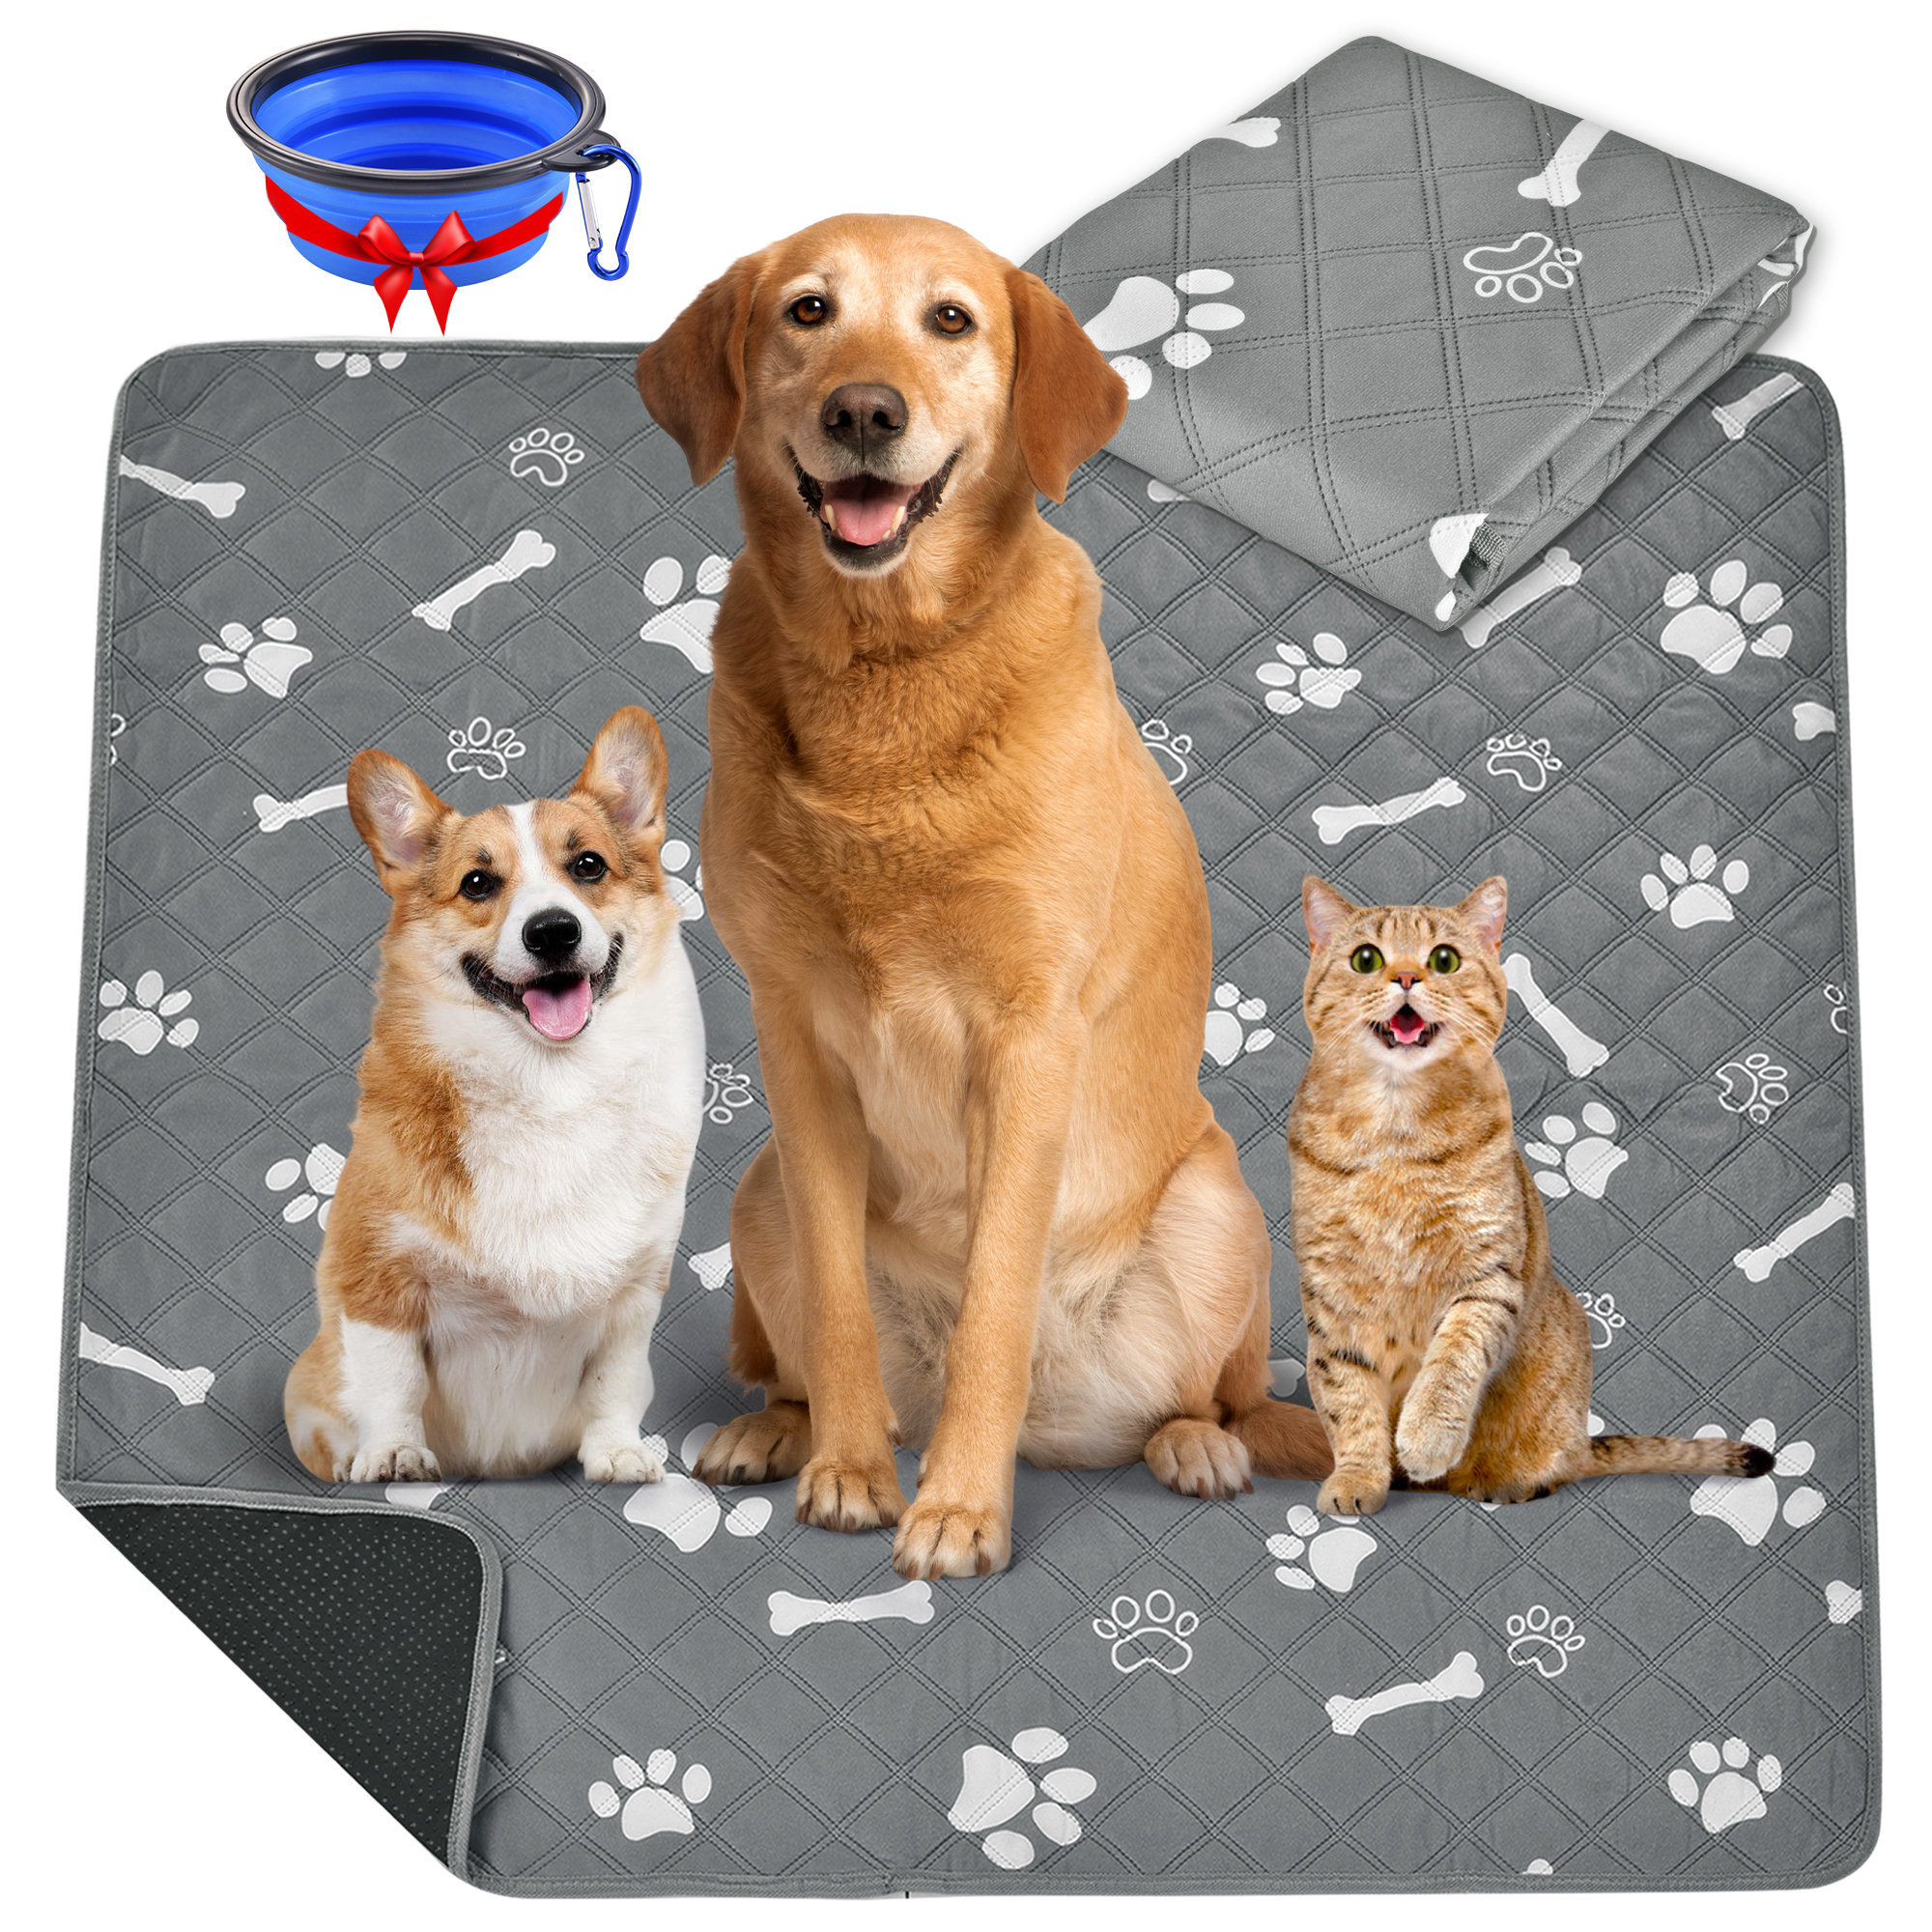 Paw Inspired Washable Pee Pads for Dogs | Reusable Puppy Pads | Waterproof Whelping Pads | Washable Training Pet Pads Washable Potty Pads Extra Large